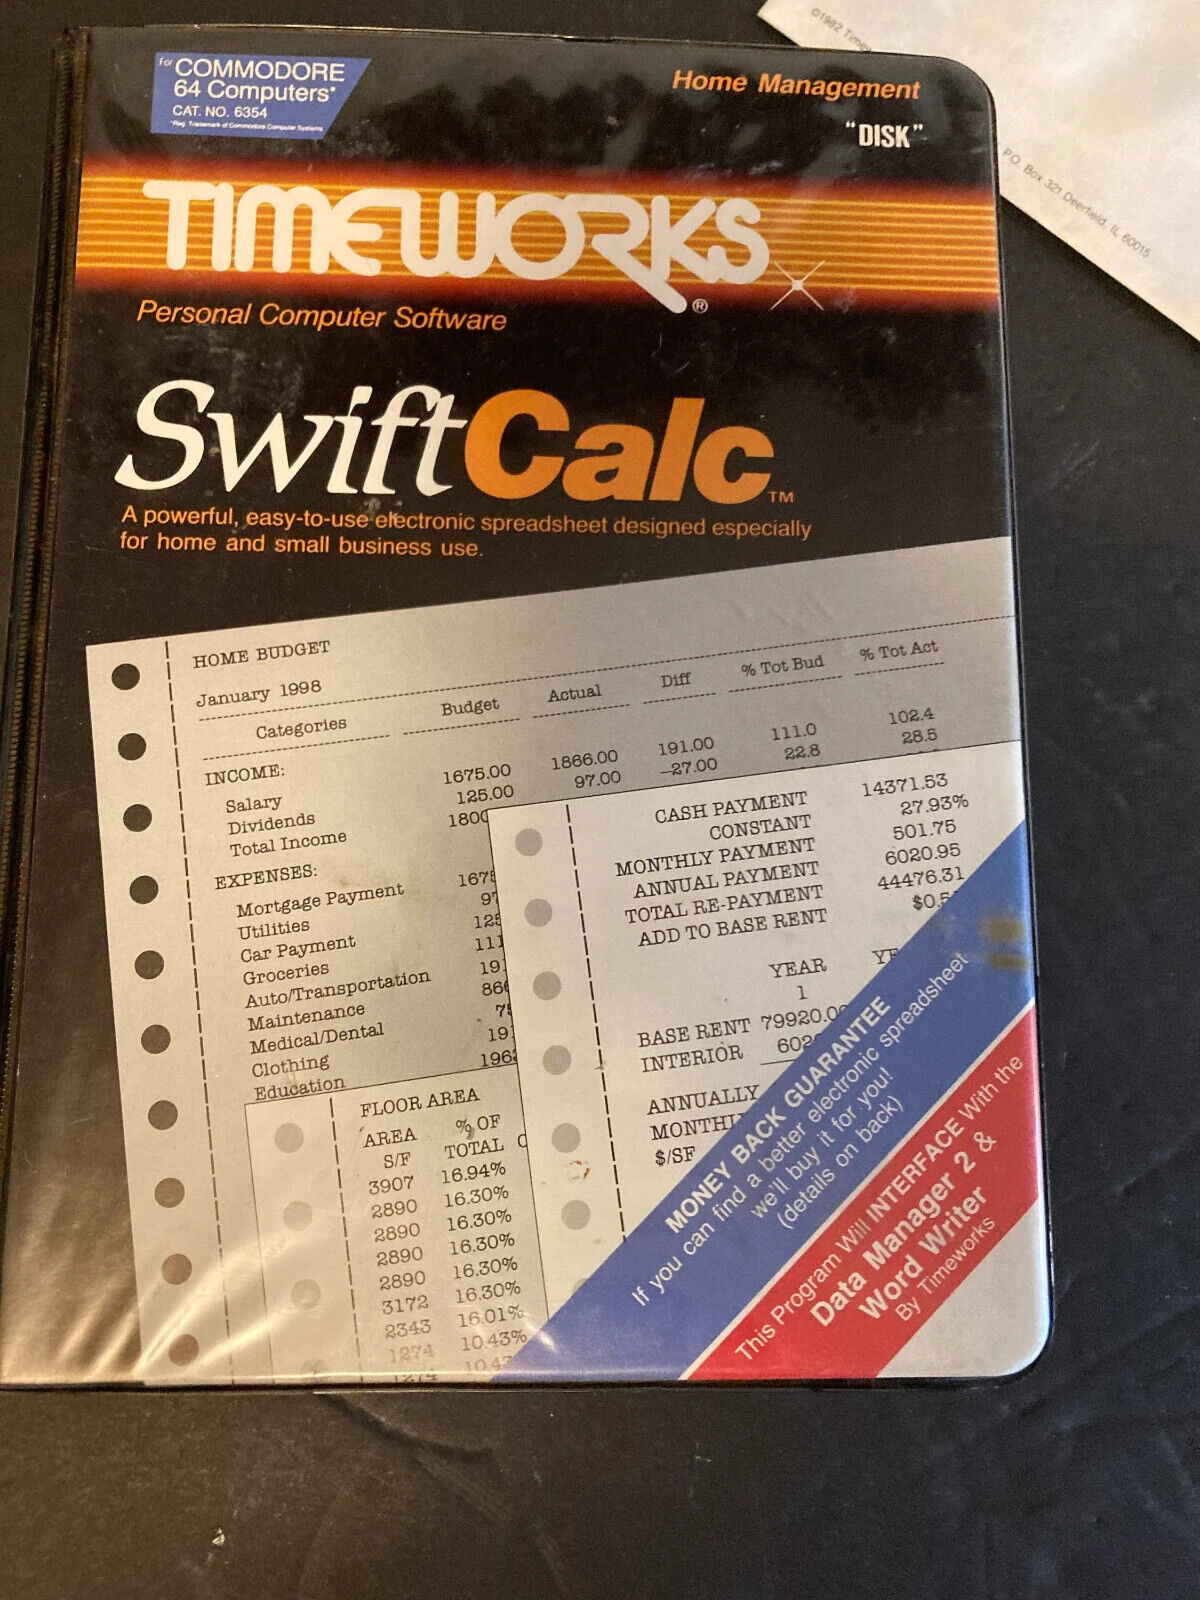 Commodore 64 SwiftCalc by Timeworks, great spreadsheet program for the commodore